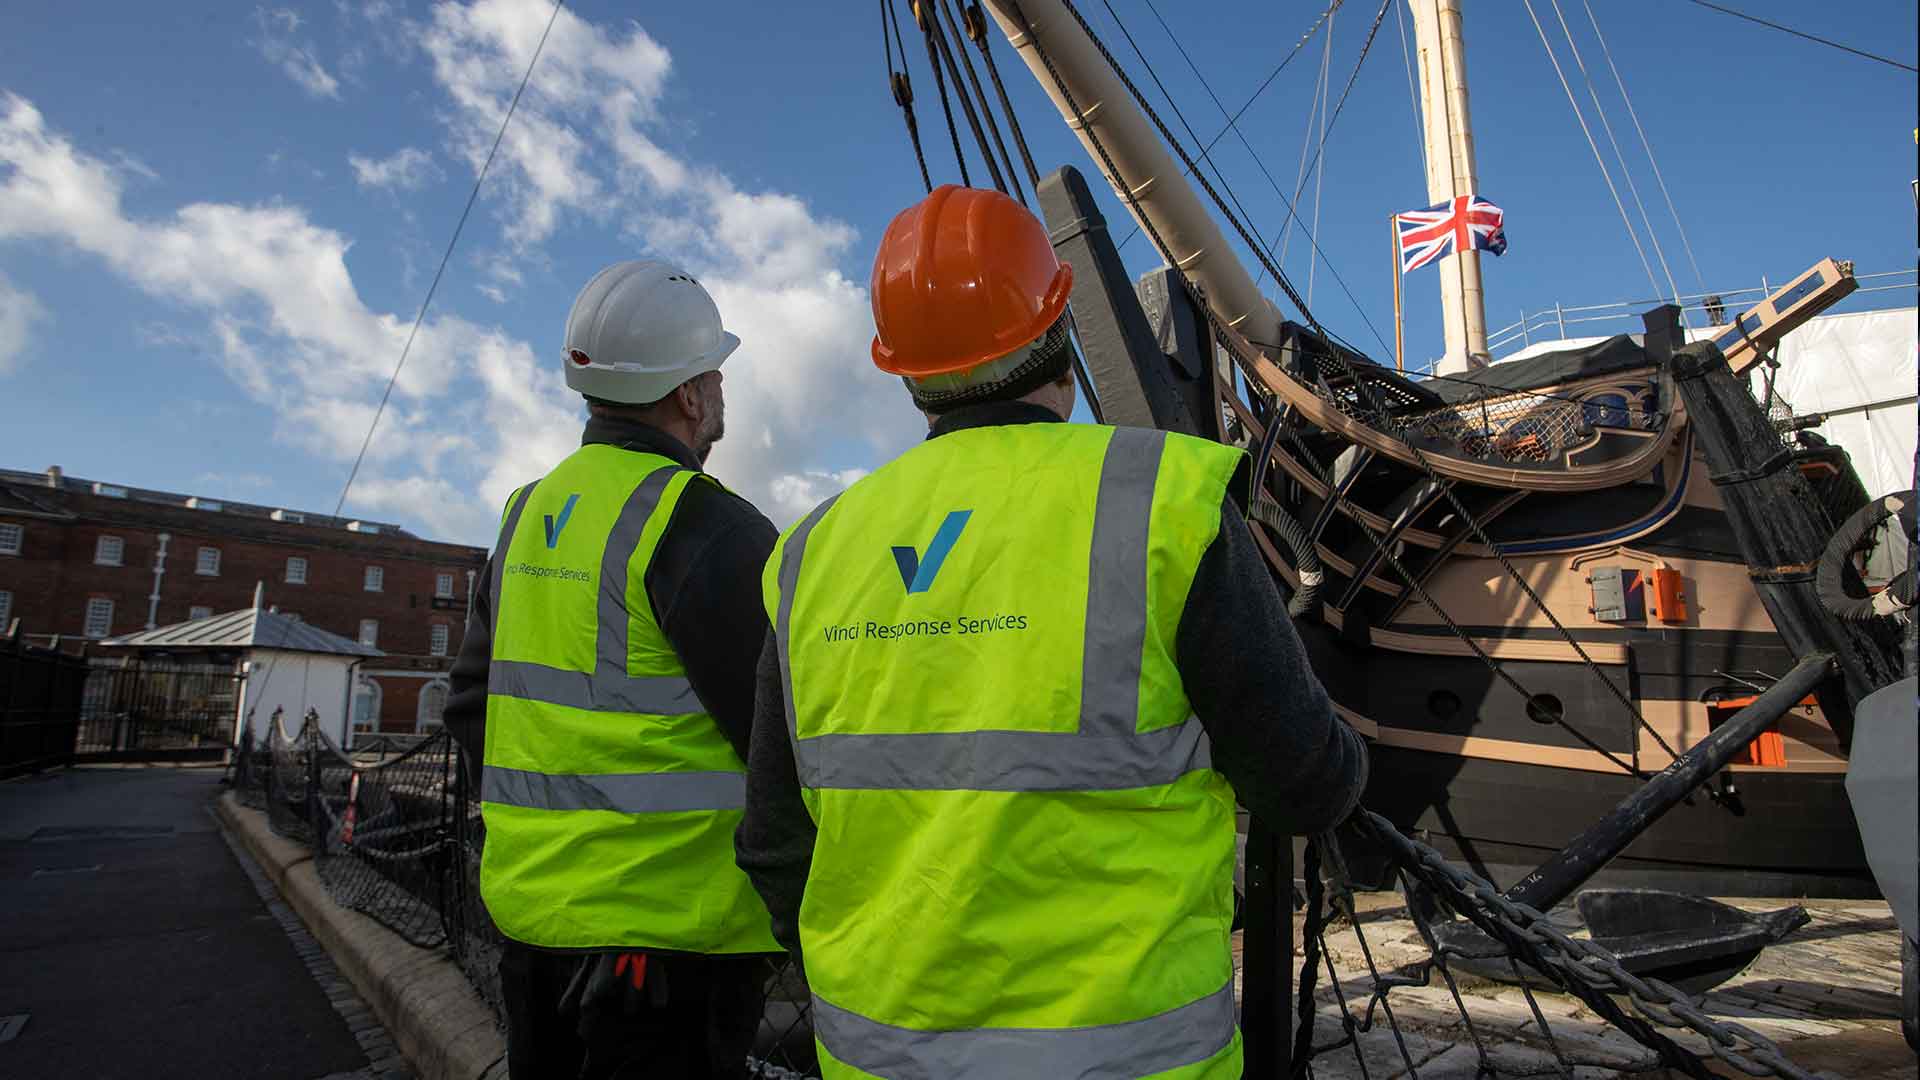 Vinci technicians working to clean the HMS Victory dry dock, at Portsmouth Historic Dockyard.